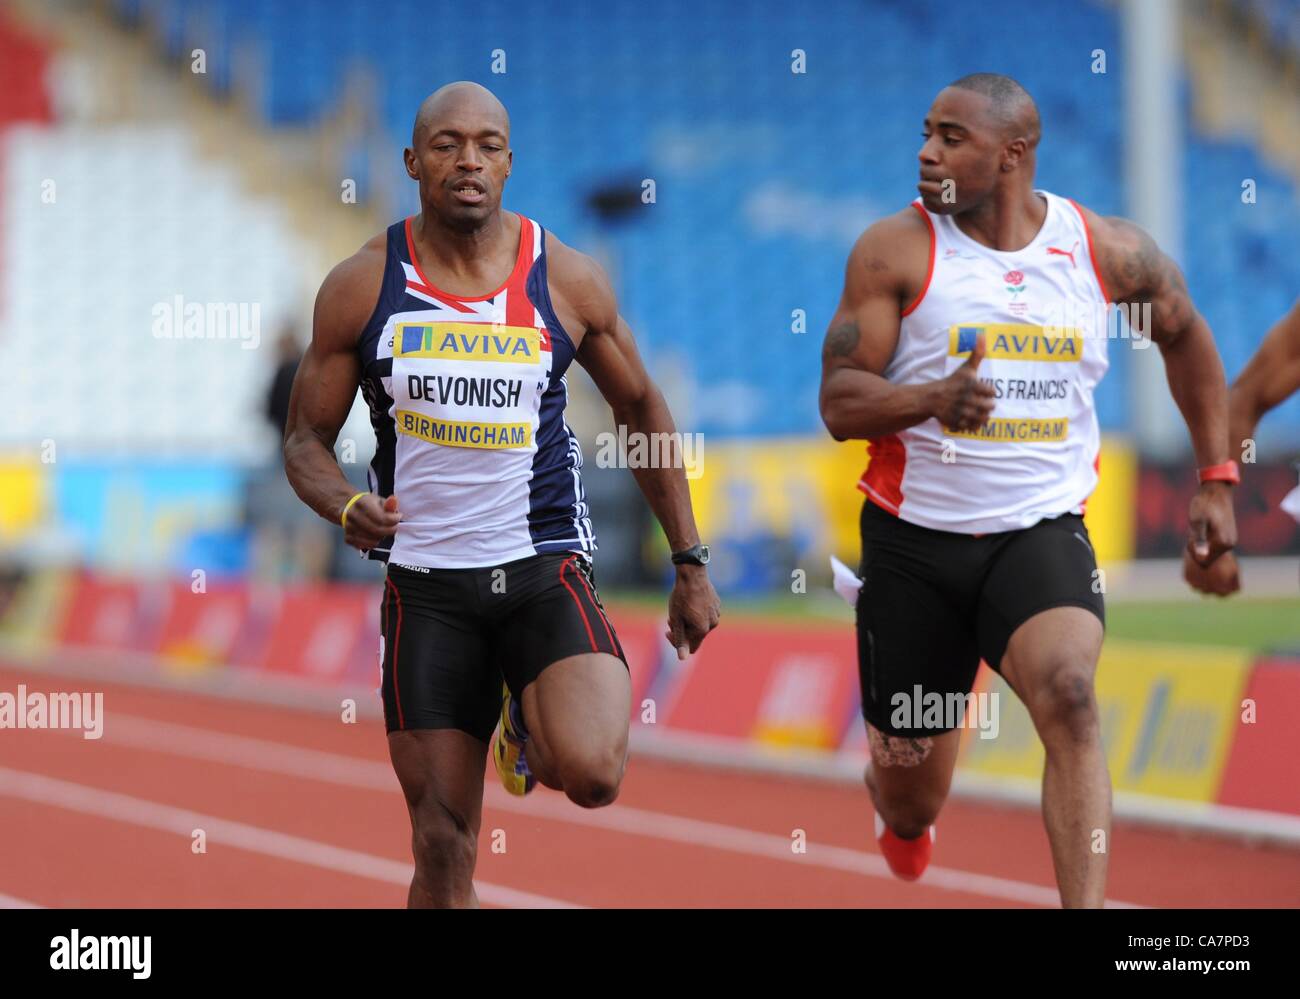 22.06.2012 Birmingham, ENGLAND : Marlon Devonish and Mark Lewis Francis in action during the Aviva Trials at the Alexandra Stadium. Stock Photo